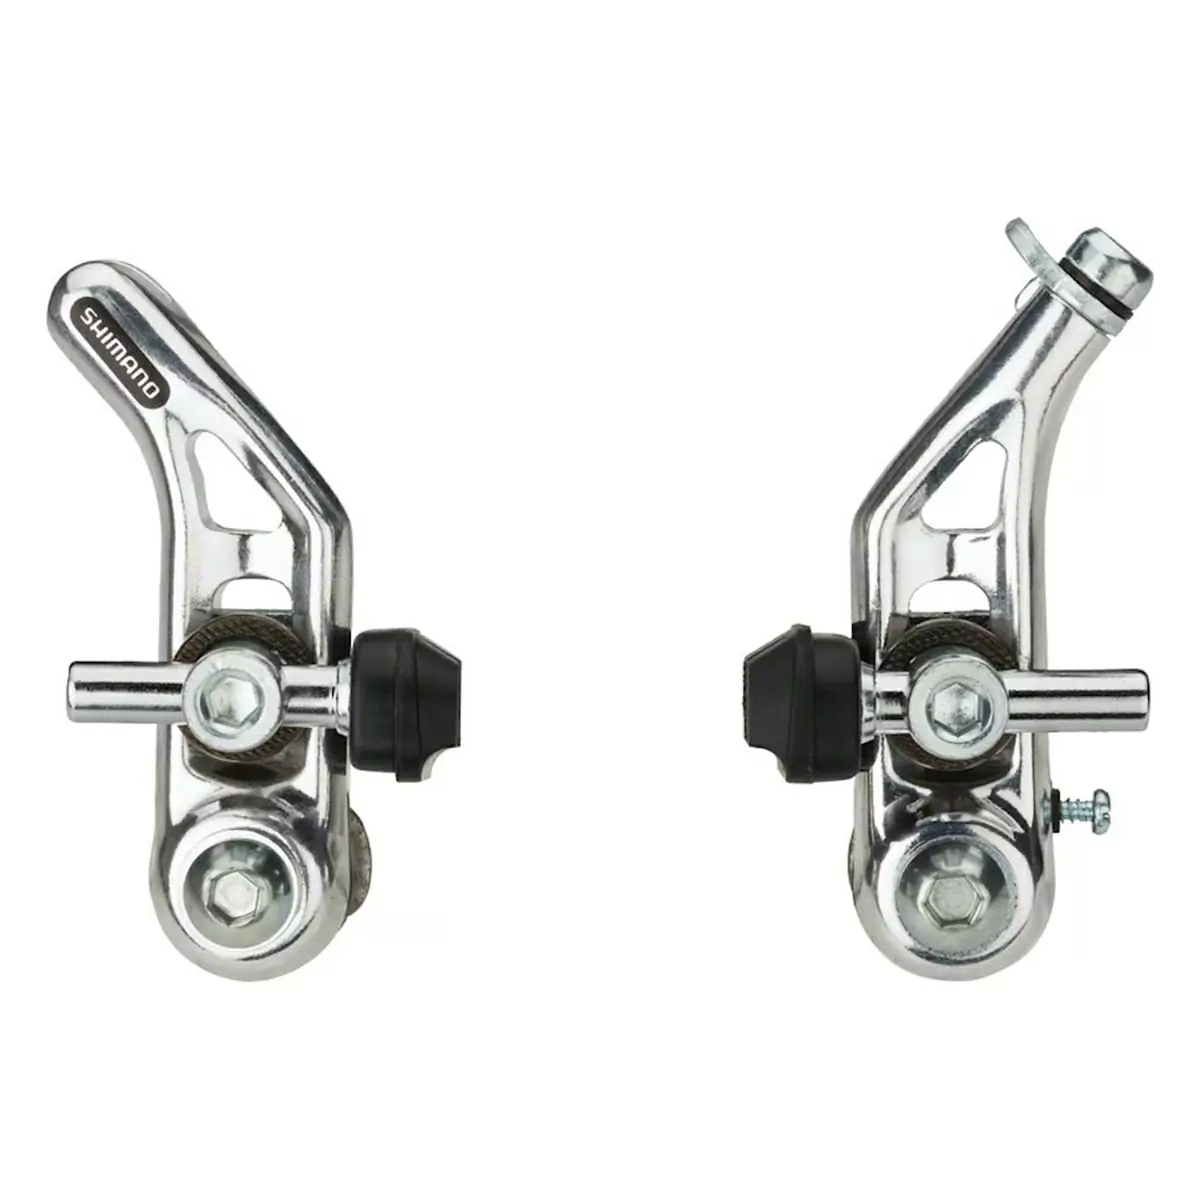 Cantilever front brake br-ct 91 silver - image